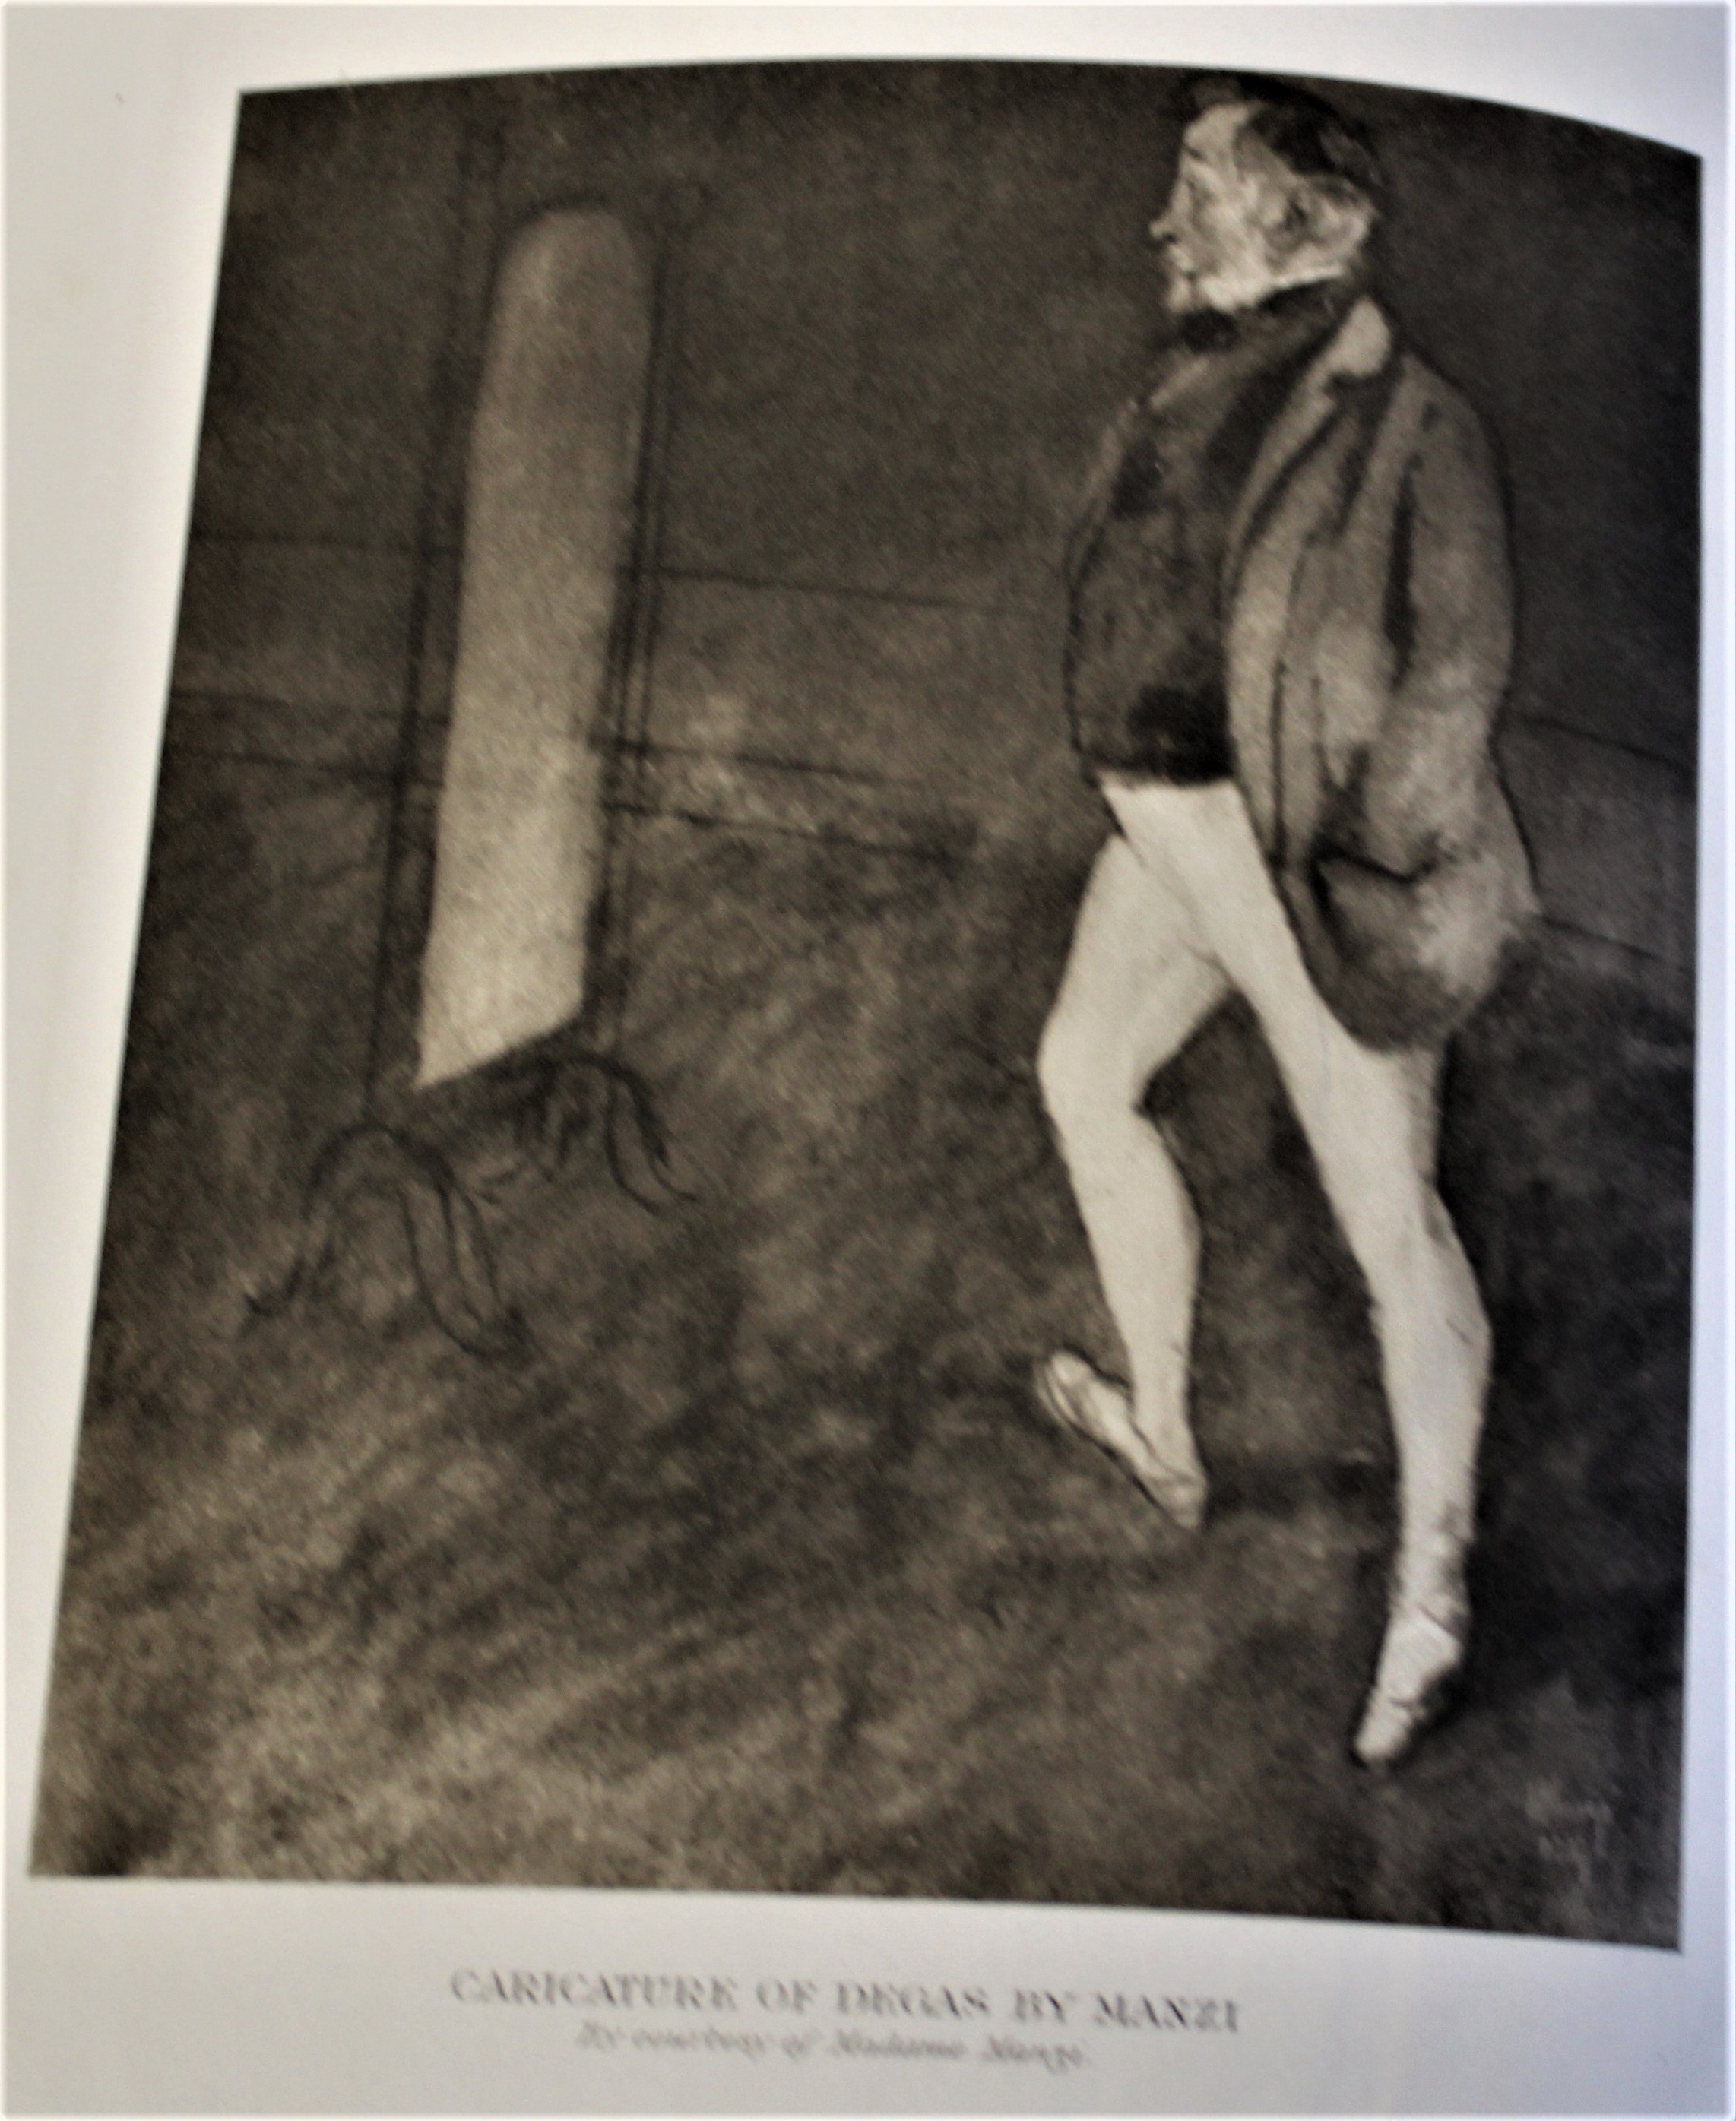 Book-'The Life and Work of Edger Degas' by J.B. Manson, coloured and black and white pictures, early - Image 4 of 4